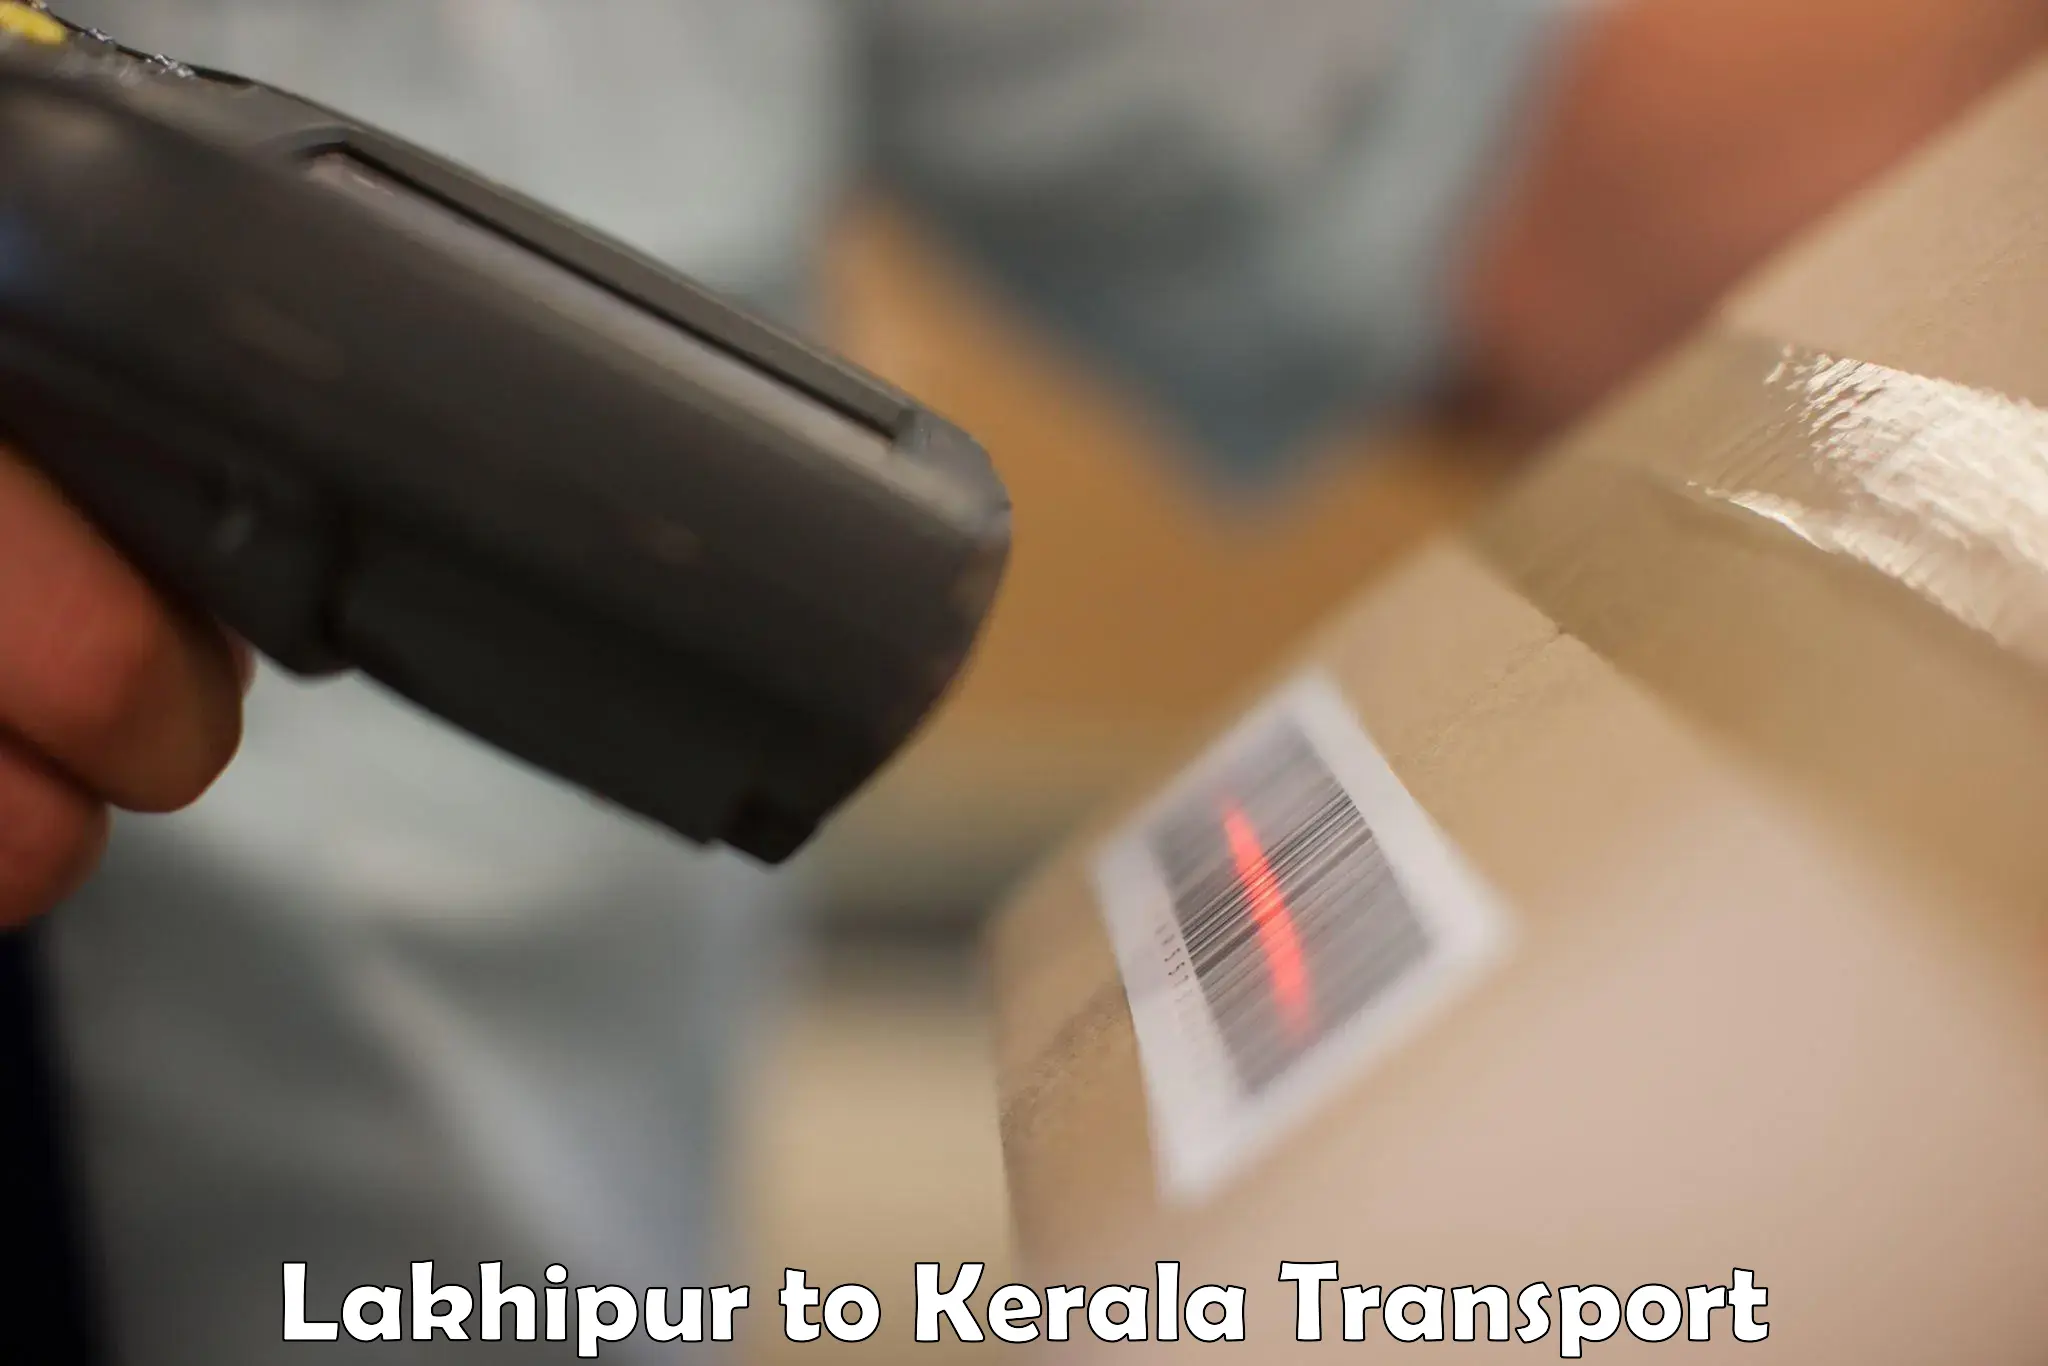 Goods delivery service Lakhipur to Cherthala